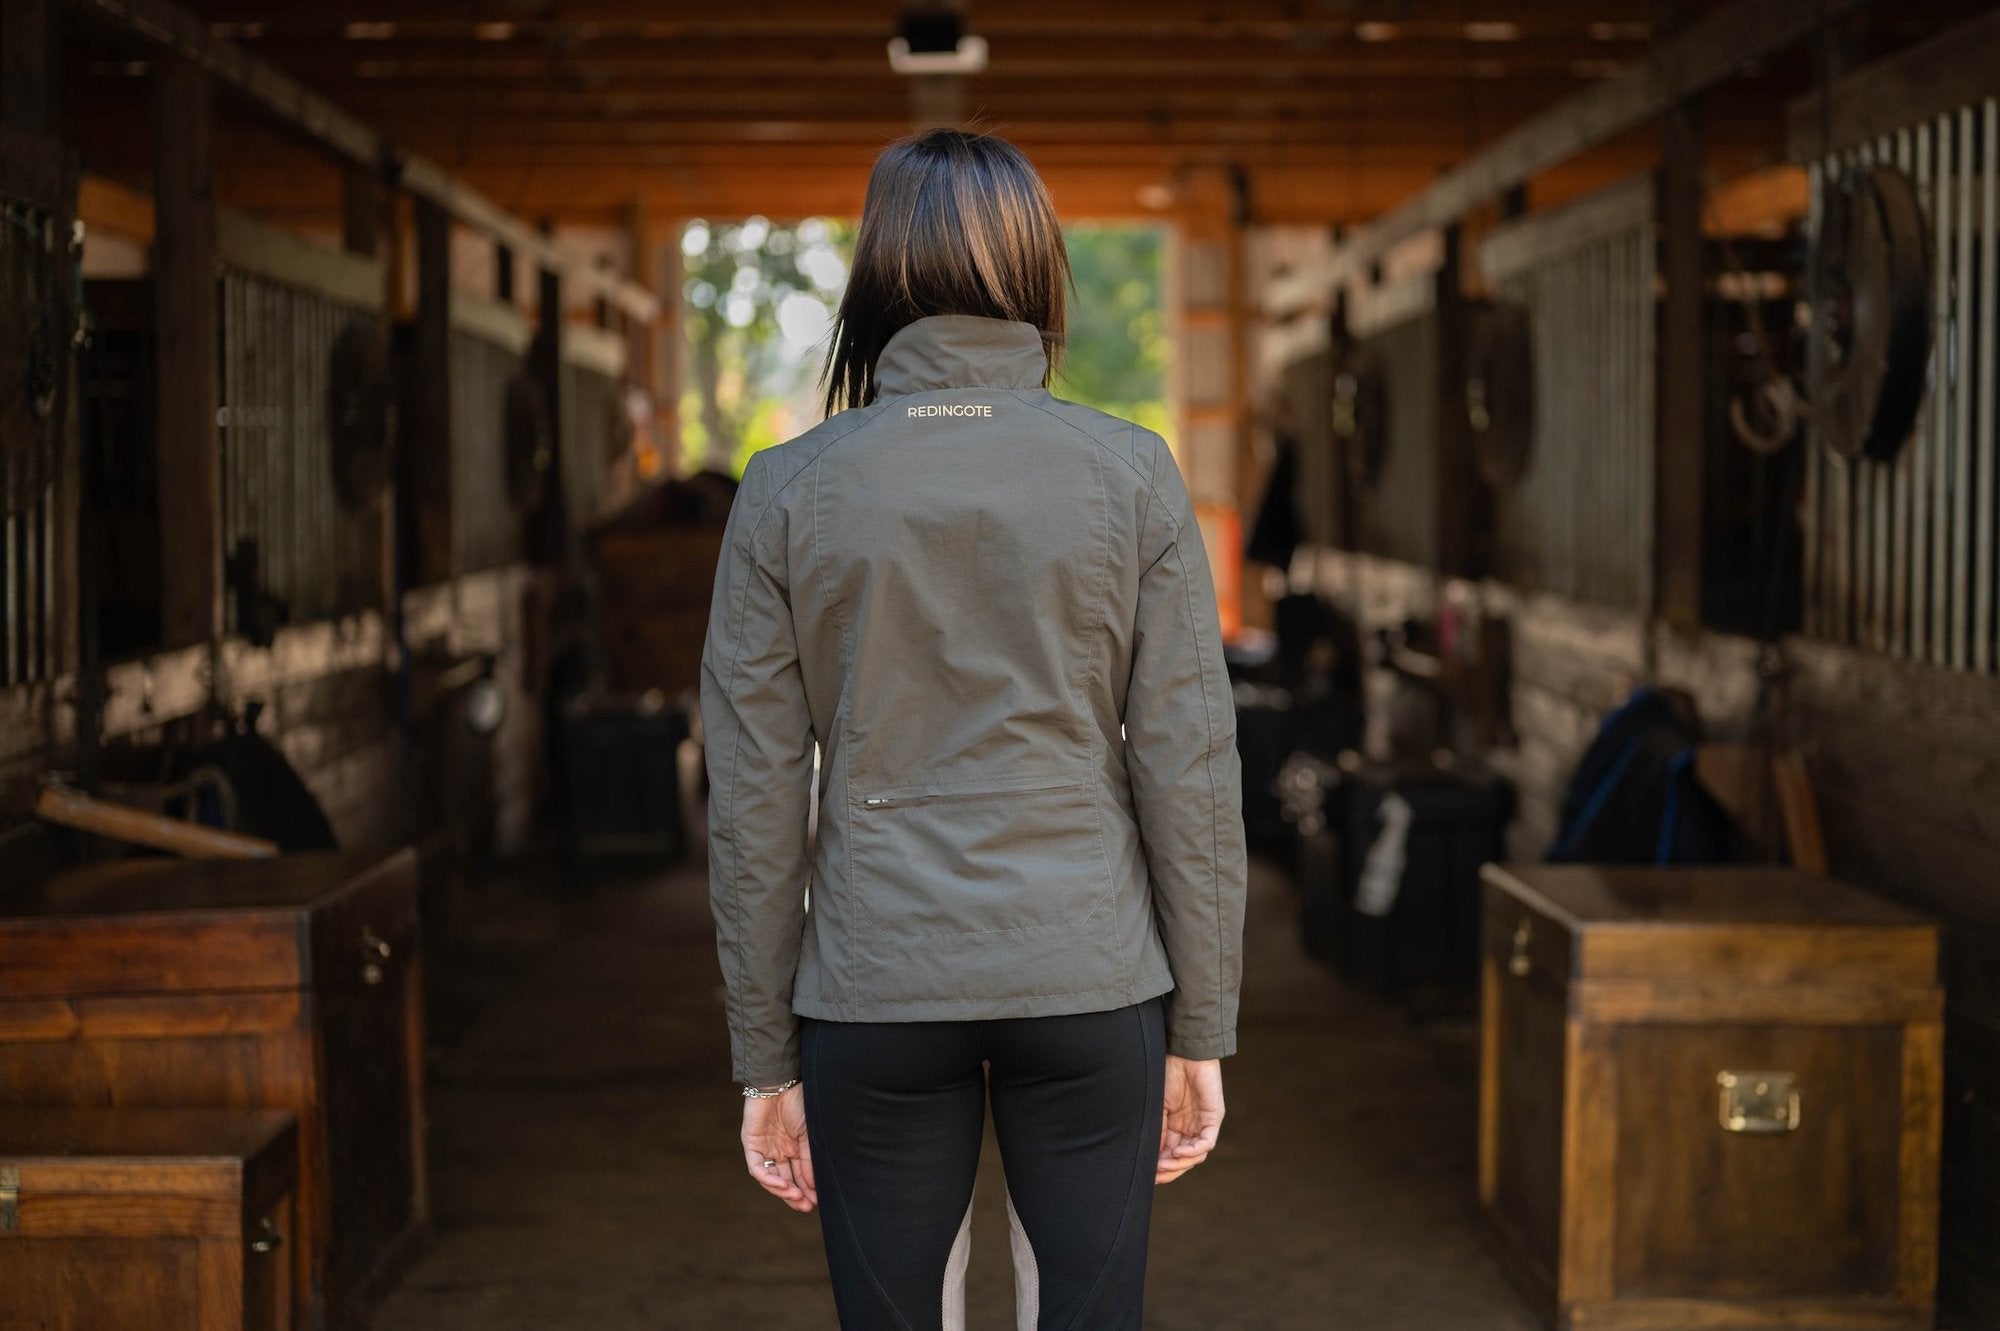 Always Riding Jacket - Olive - Equiluxe Tack